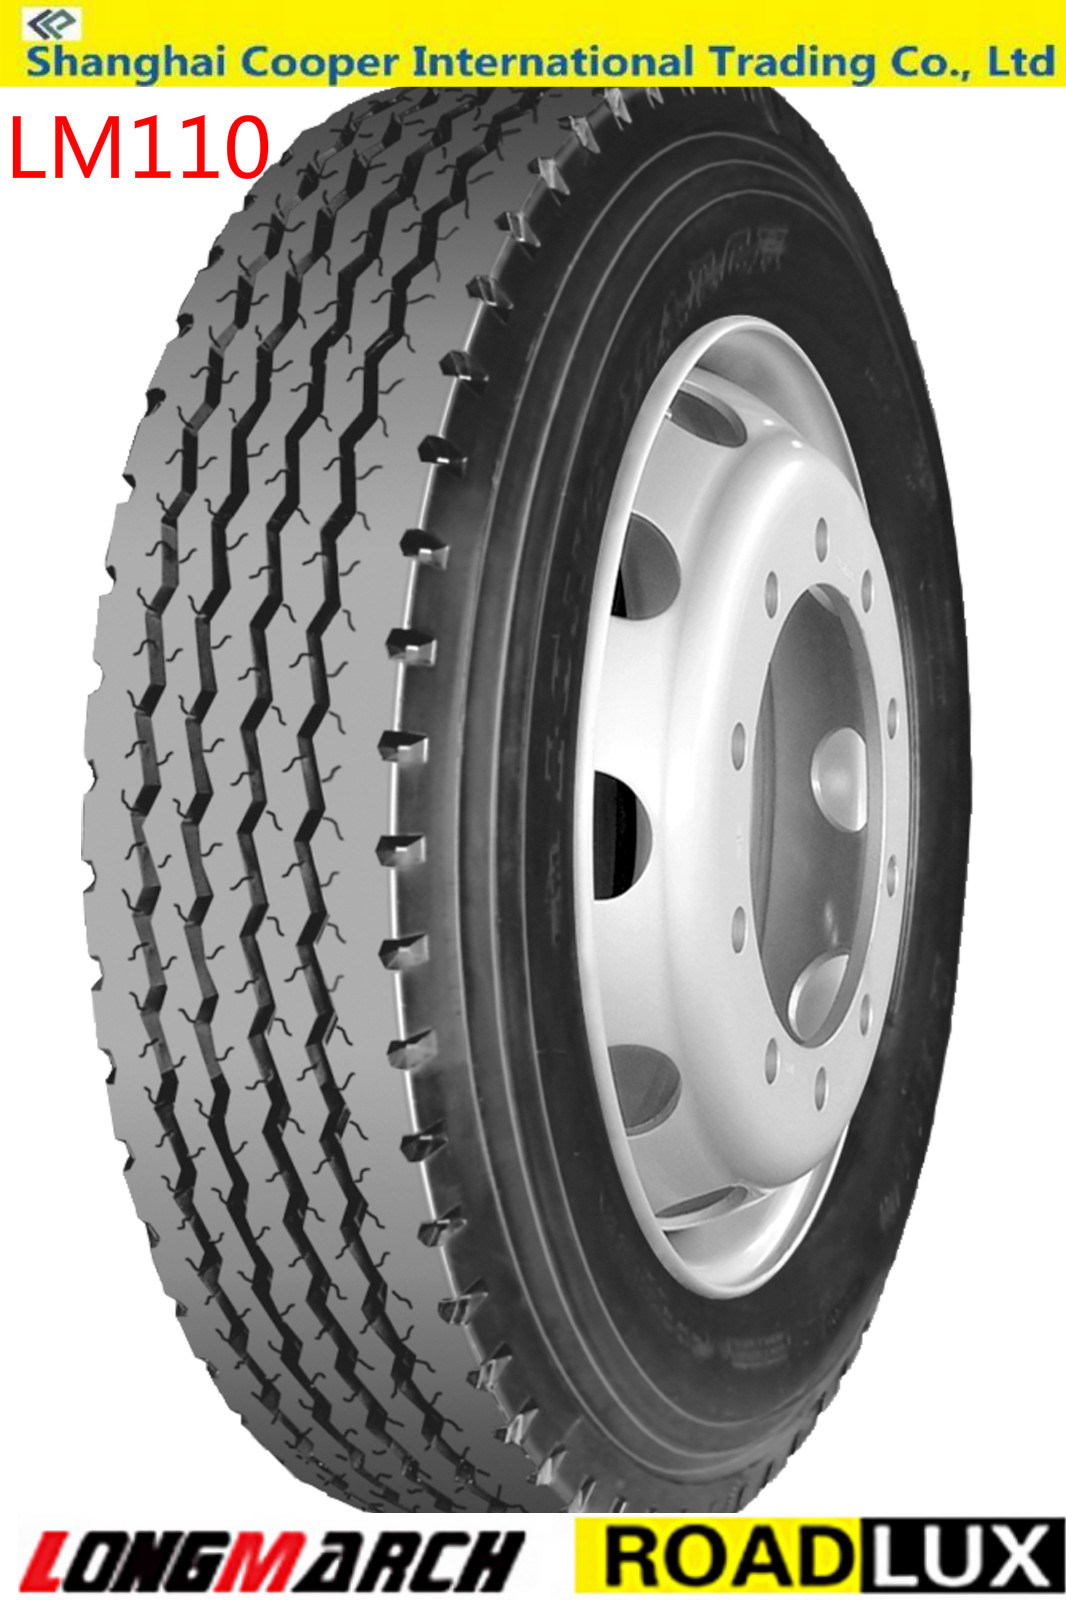 305/70R19.5 Chinese Long March Roadlux Tubeless Radial Truck Tyre (LM110)